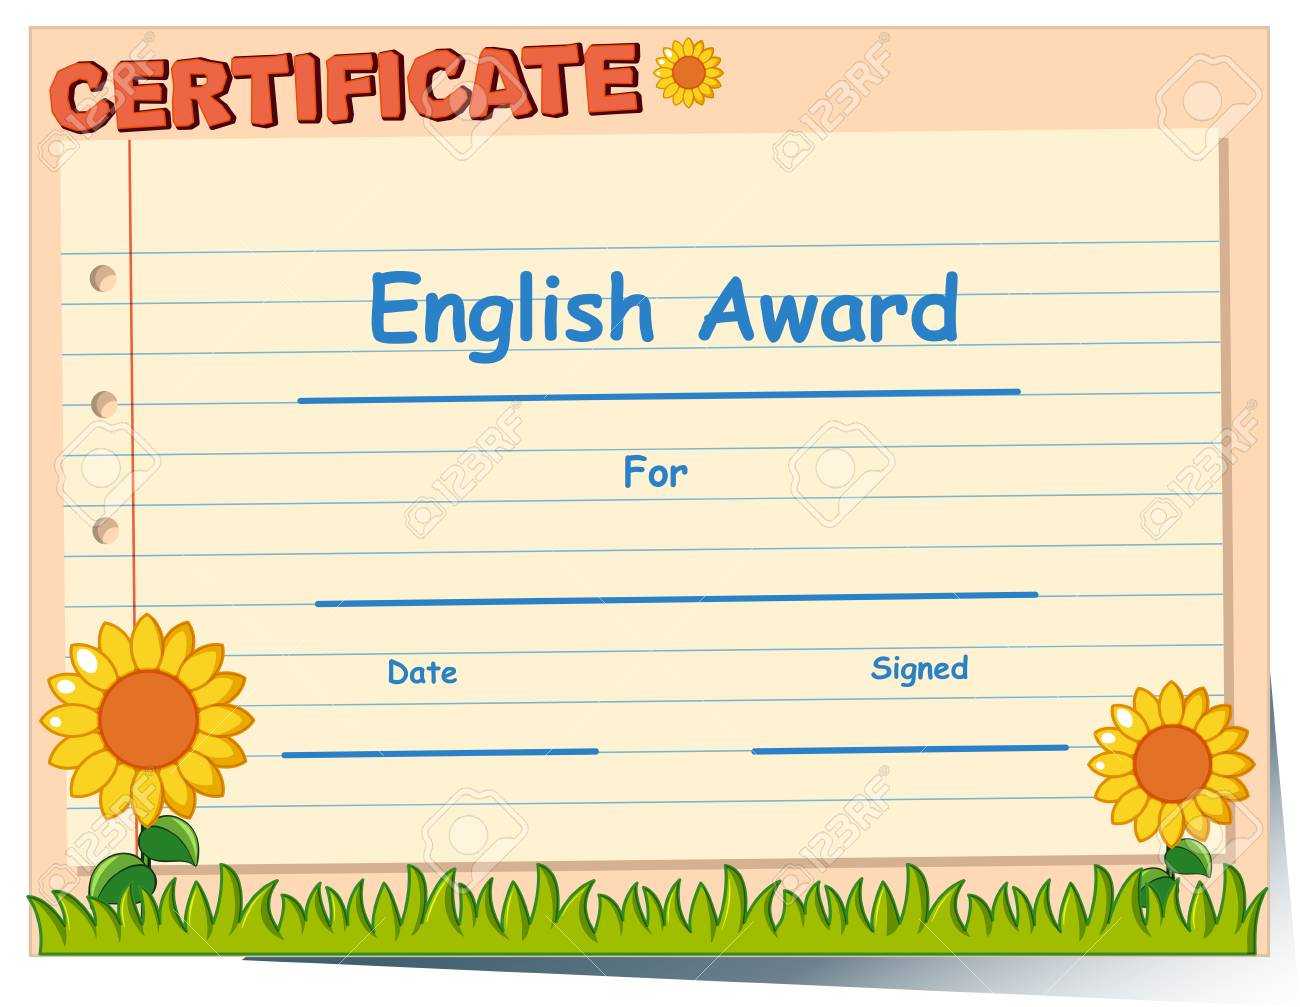 Certificate Template For English Award Illustration With Free Printable Blank Award Certificate Templates